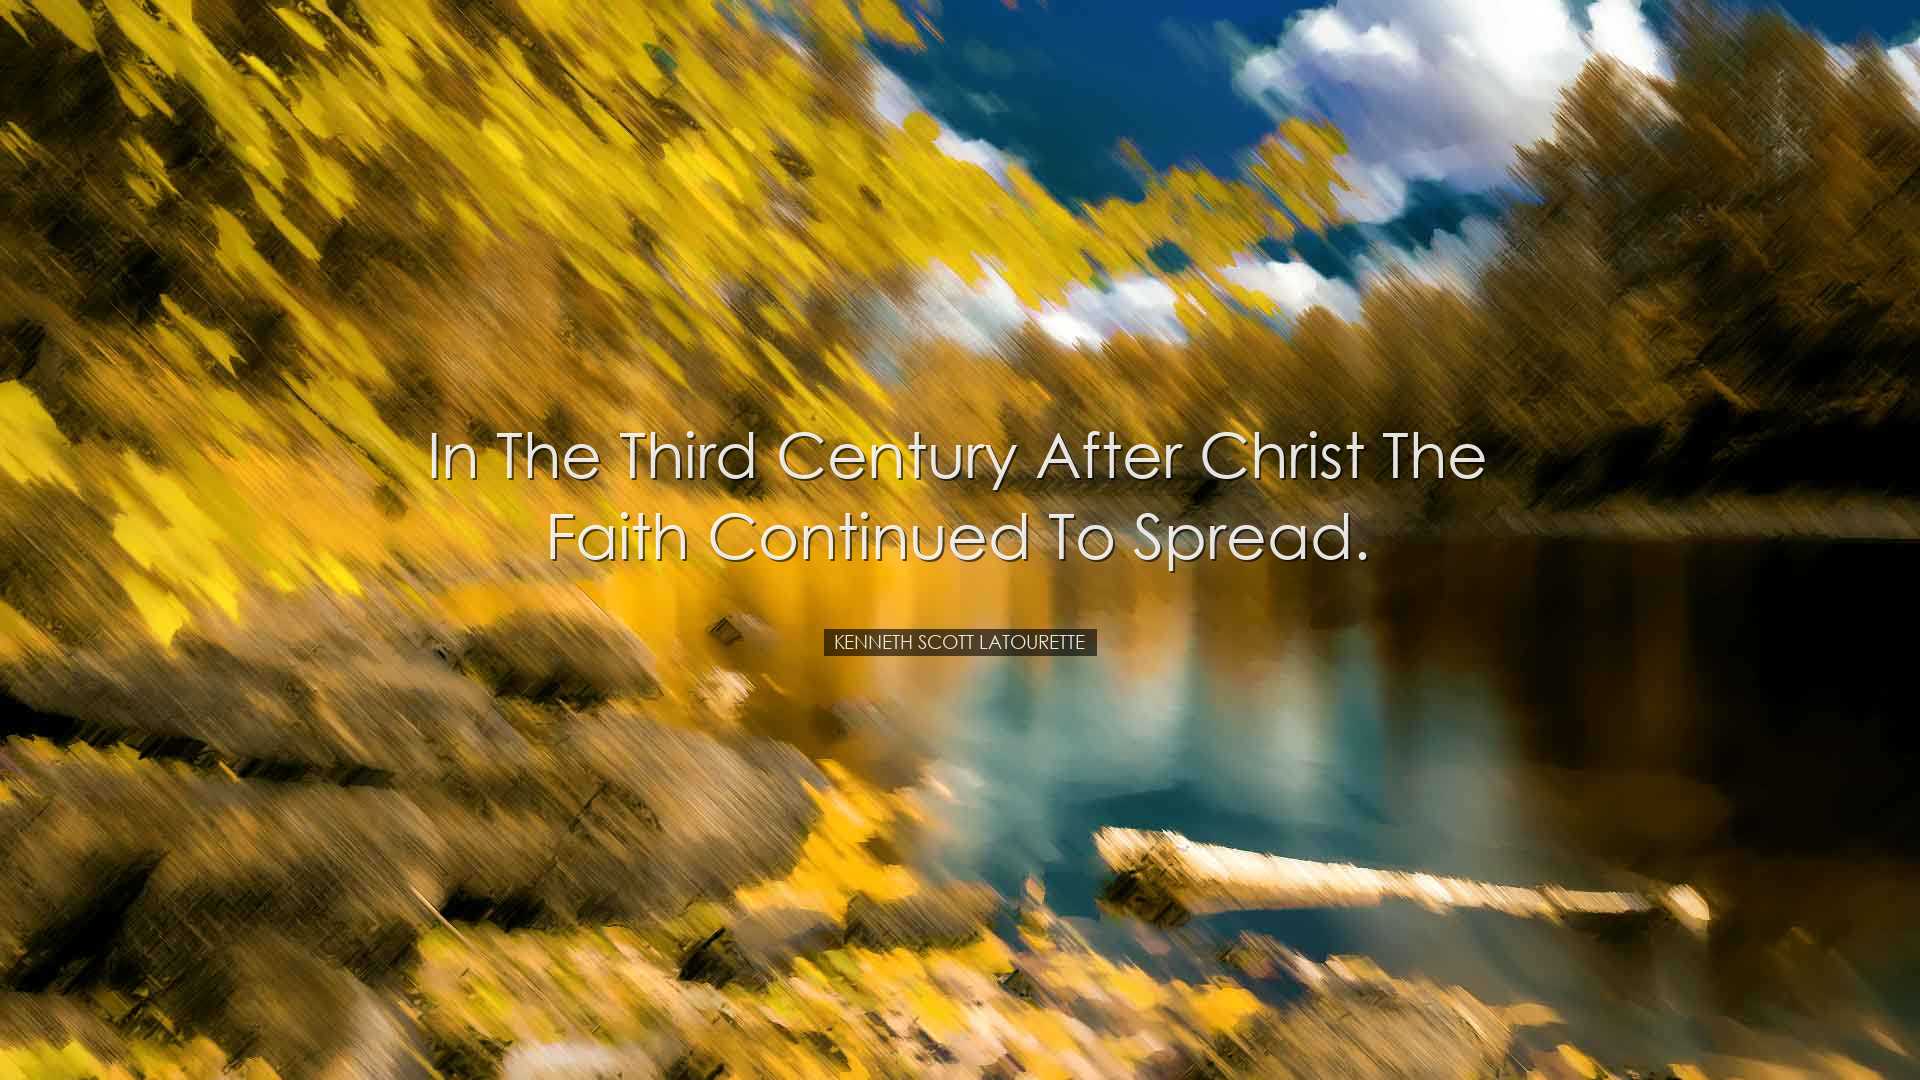 In the third century after Christ the faith continued to spread. -